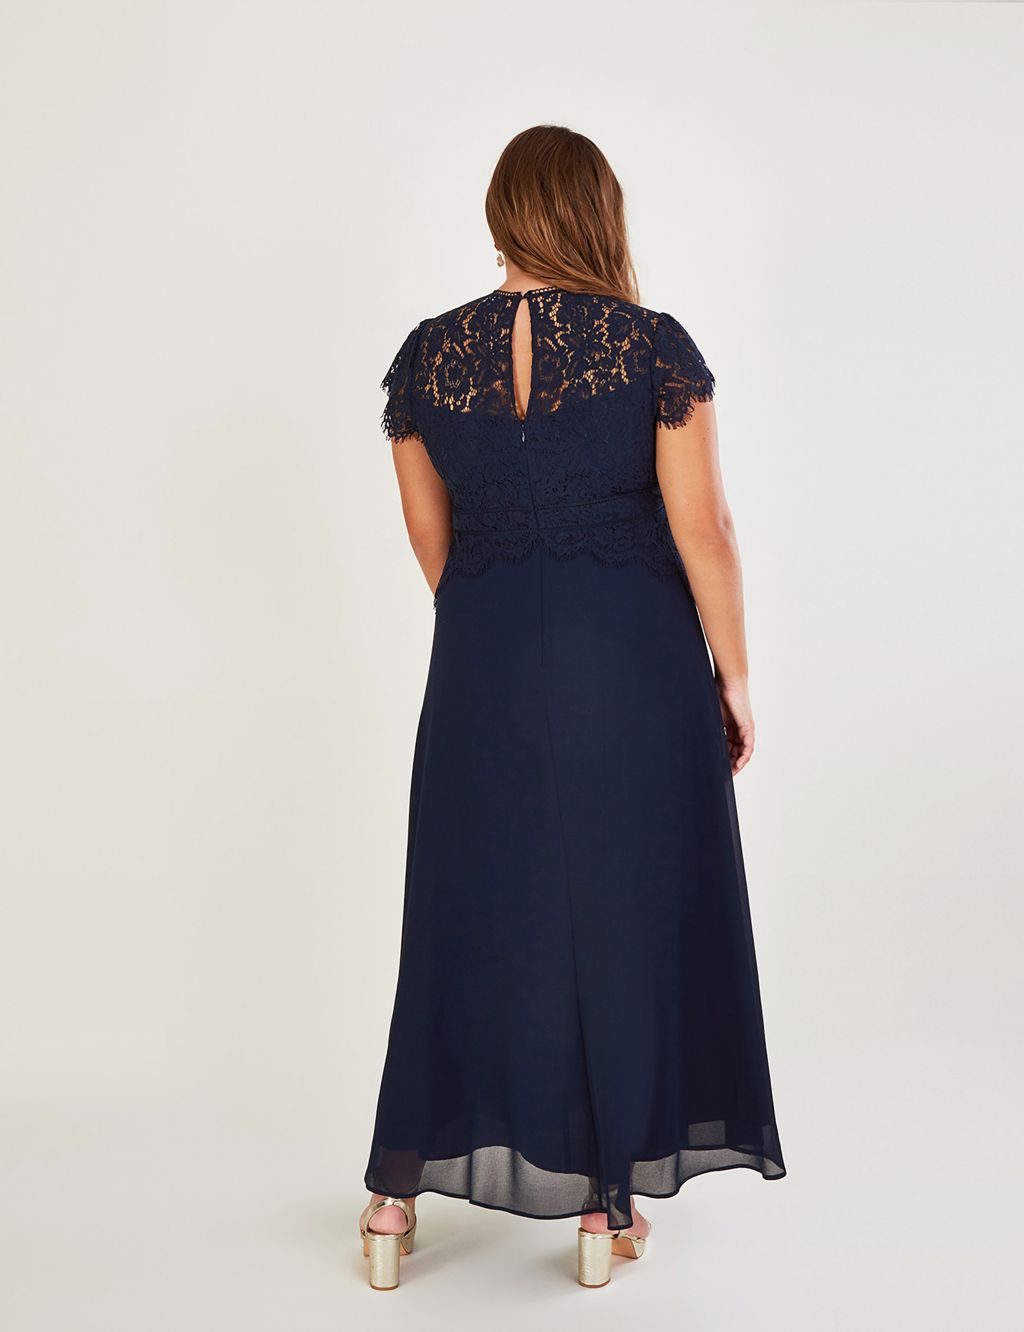 Lace Embroidered Maxi Waisted Dress image 5